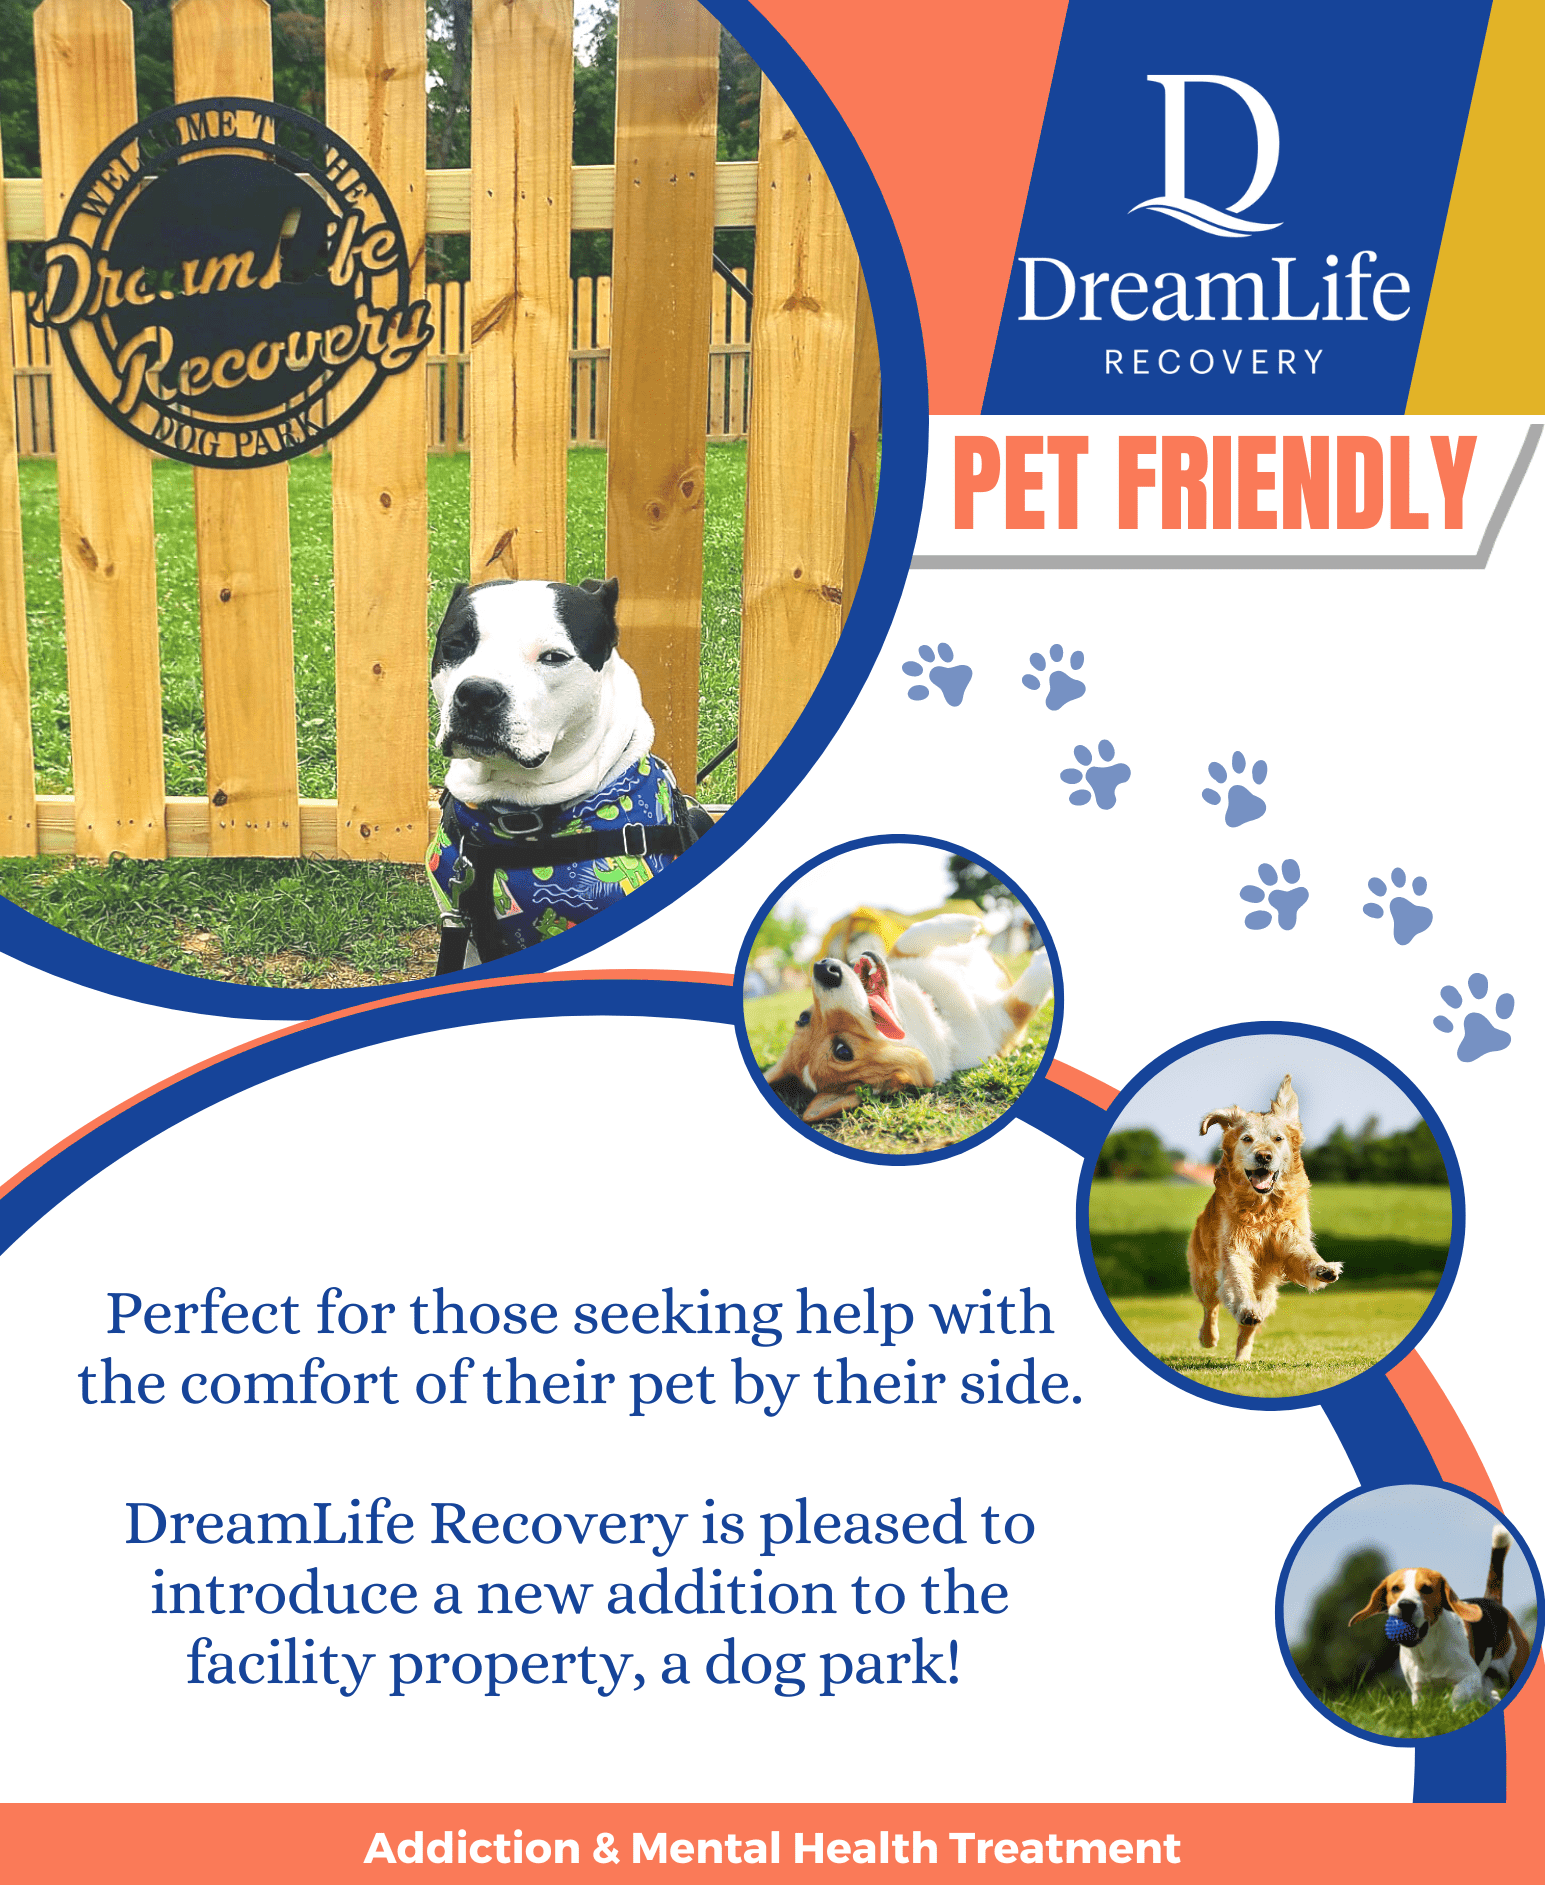 pet-friendly rehab flyer for dreamlife recovery, image of dogs running at facilities